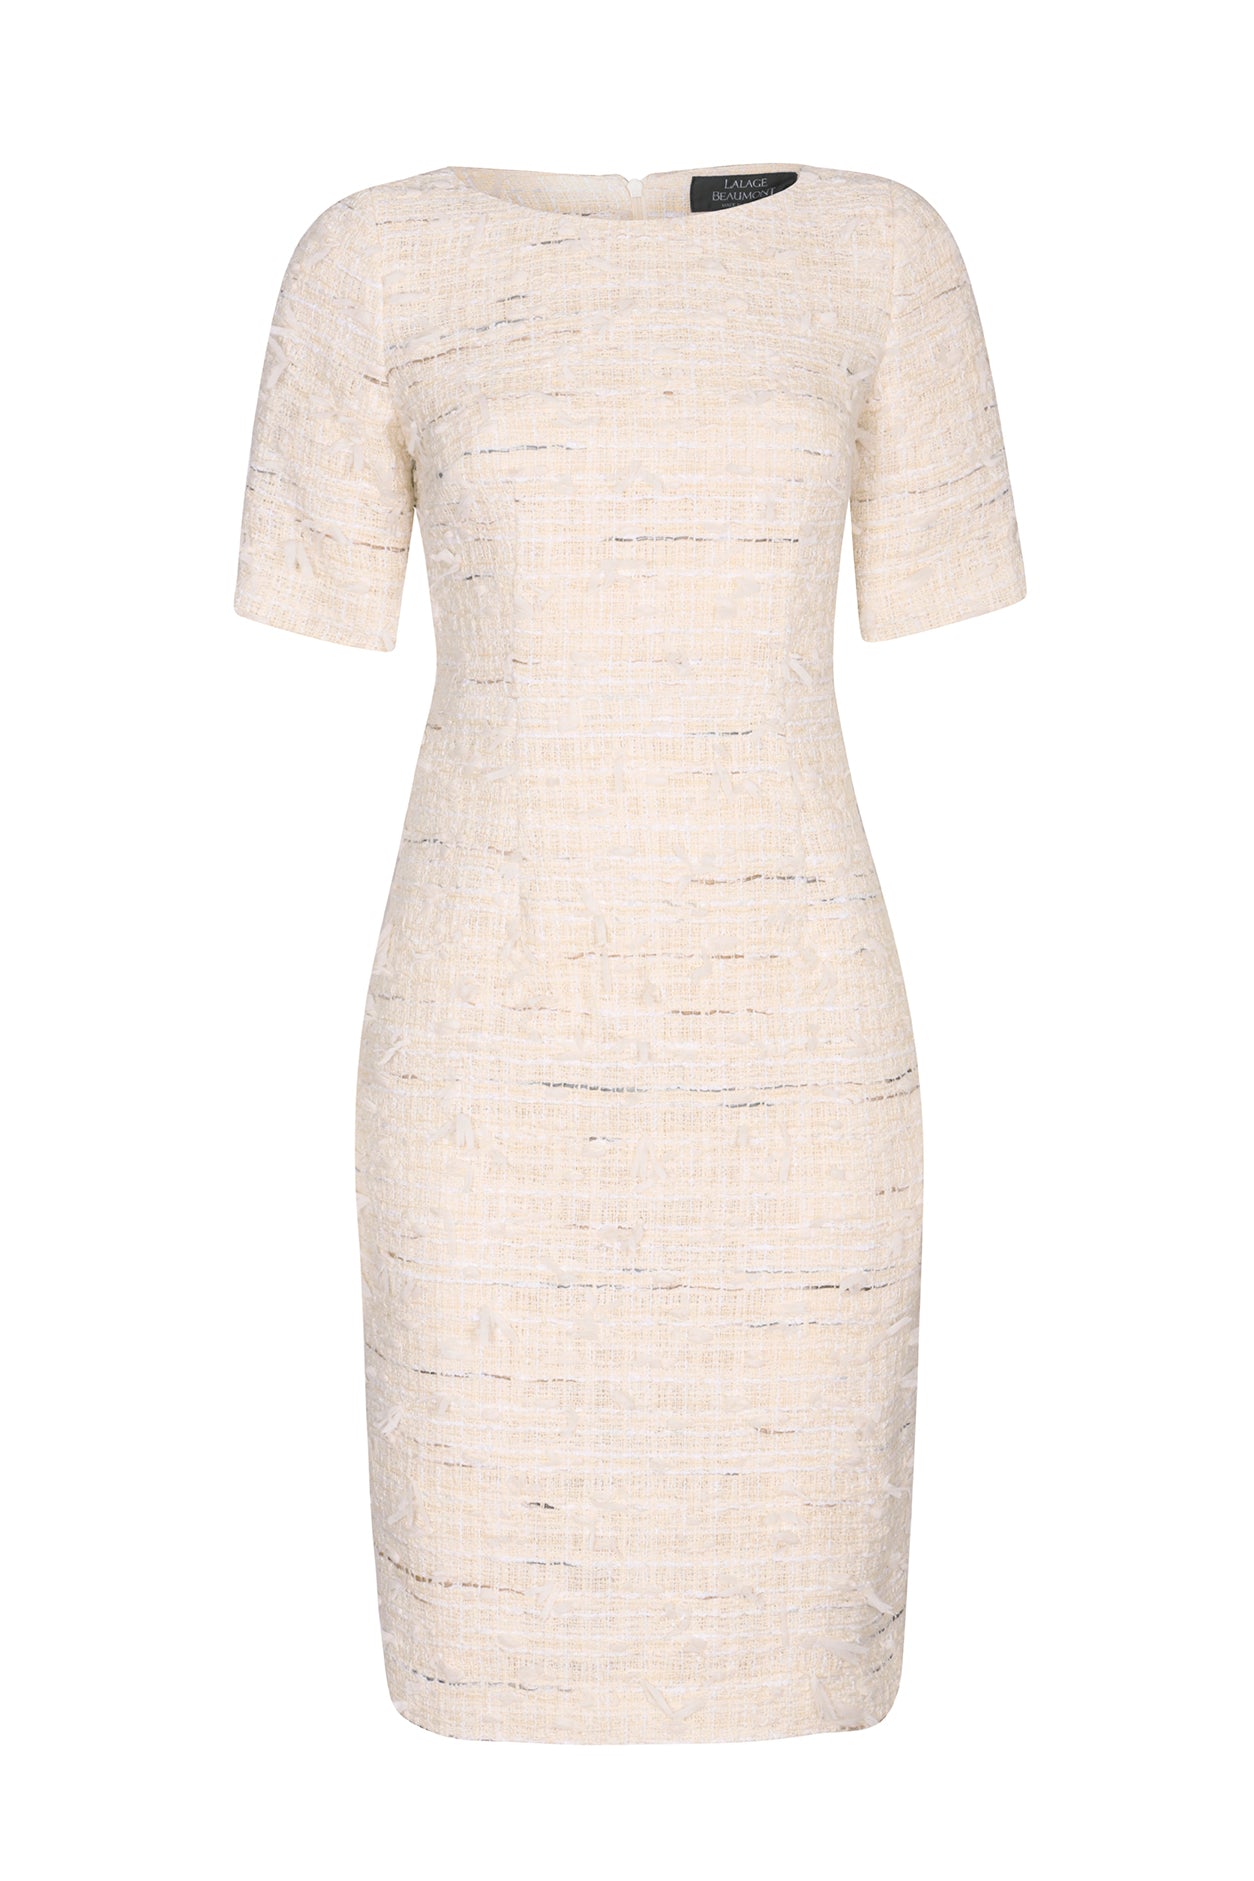 Cream Summer Tweed Dress with Elbow Length Sleeves - Angie